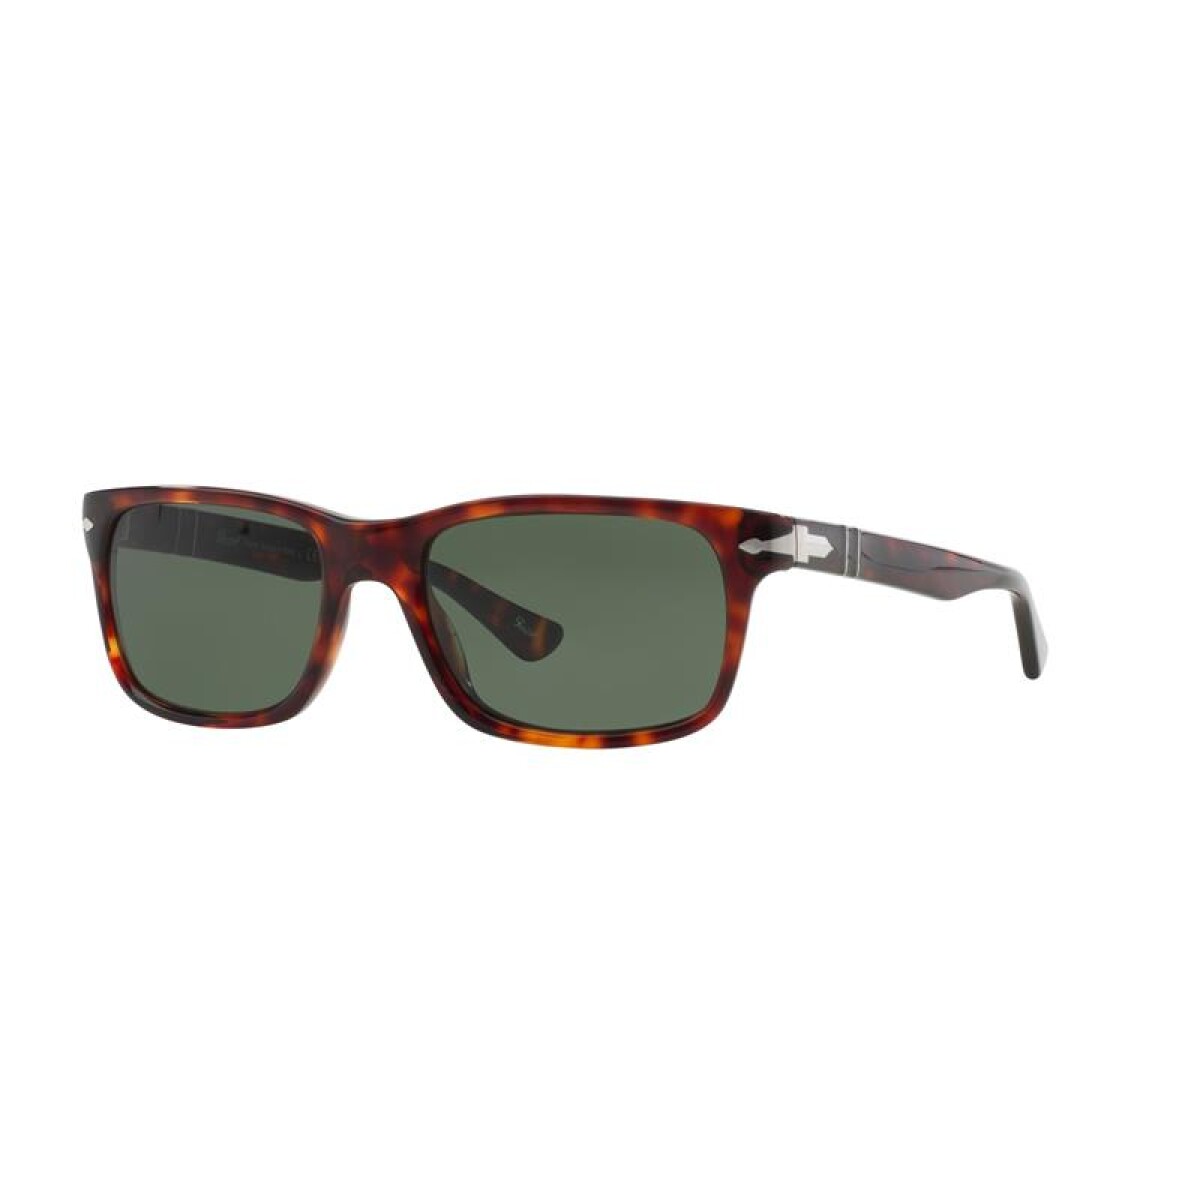 Persol 3048-s - 24/31 